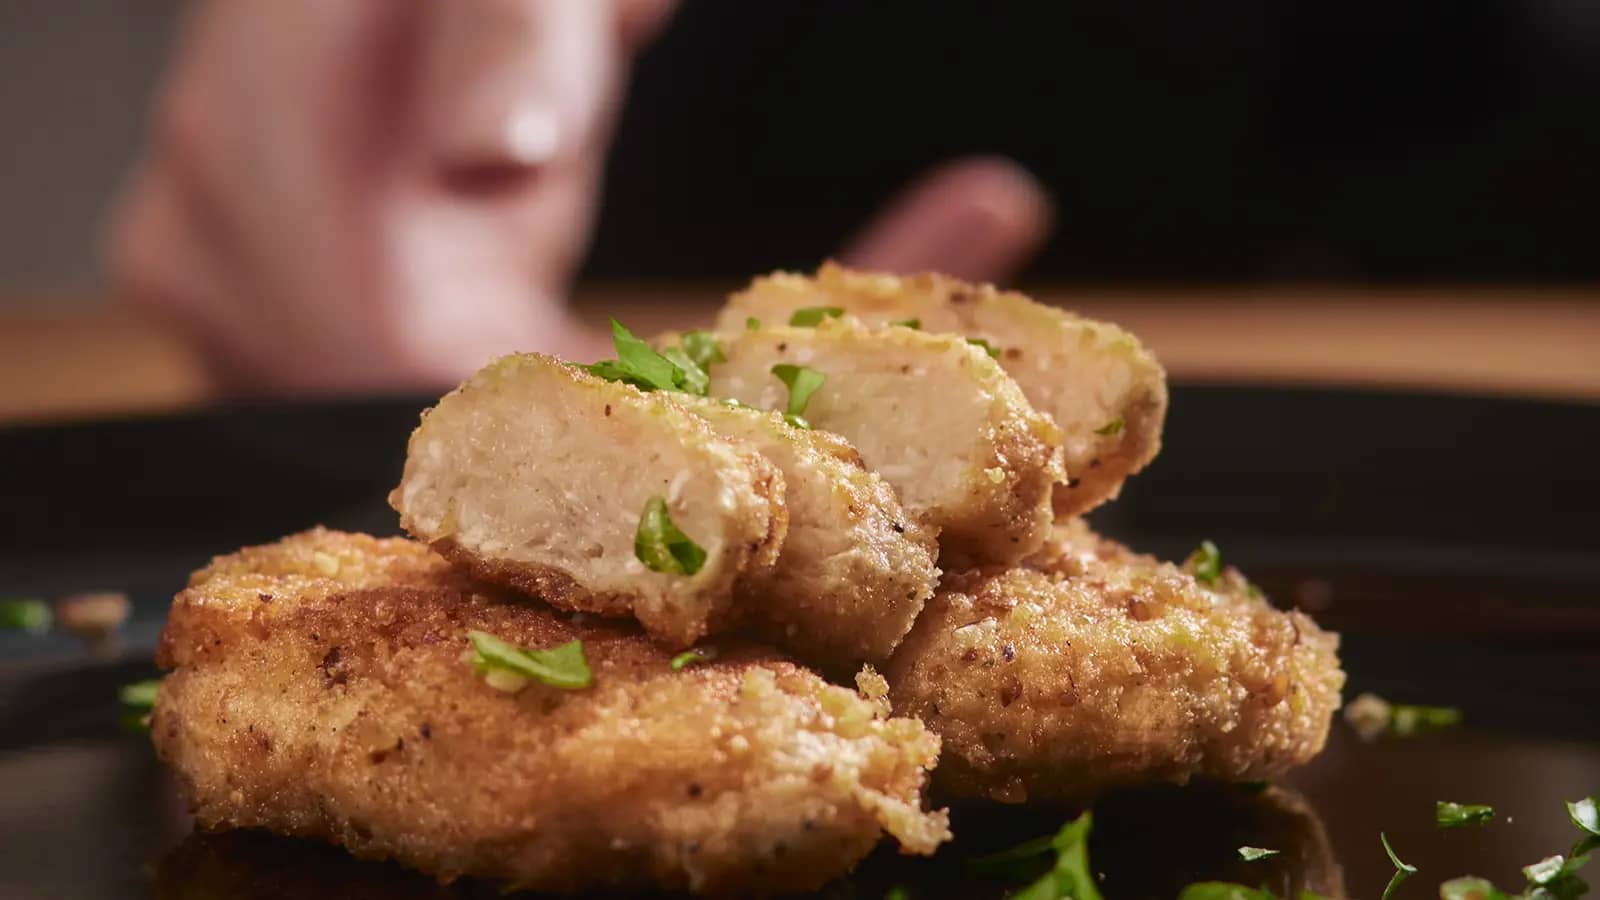 South African foodtech company Mogale Meat unveils Africa’s first cultivated chicken breast